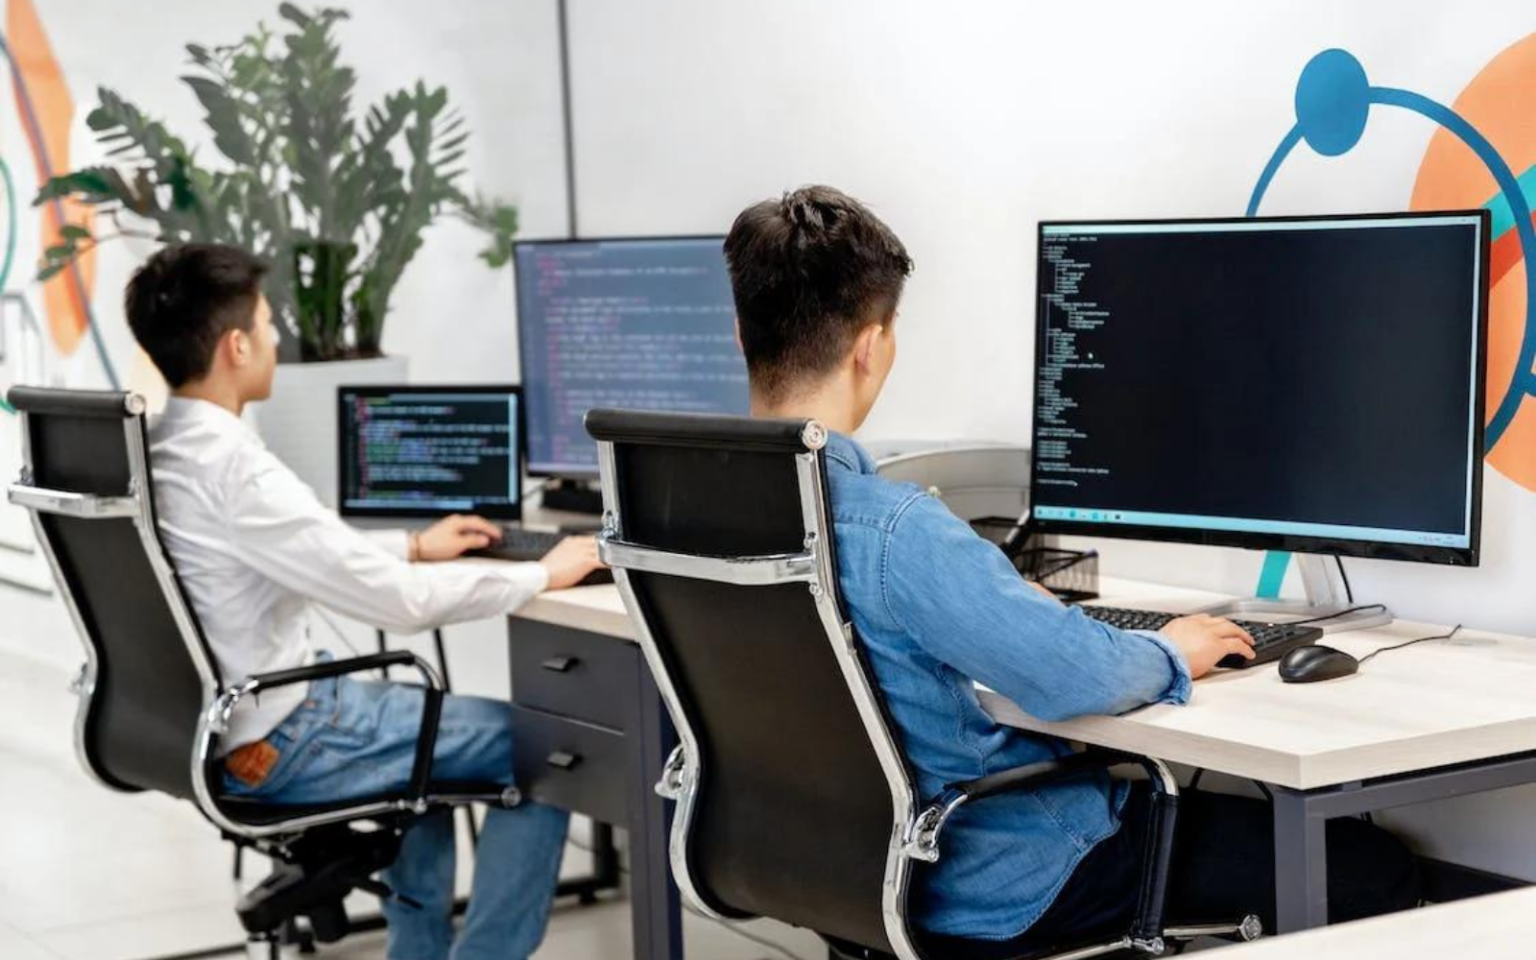 If you hire a software tester, your set up could be like these two software testers at a desk helping to secure your systems.